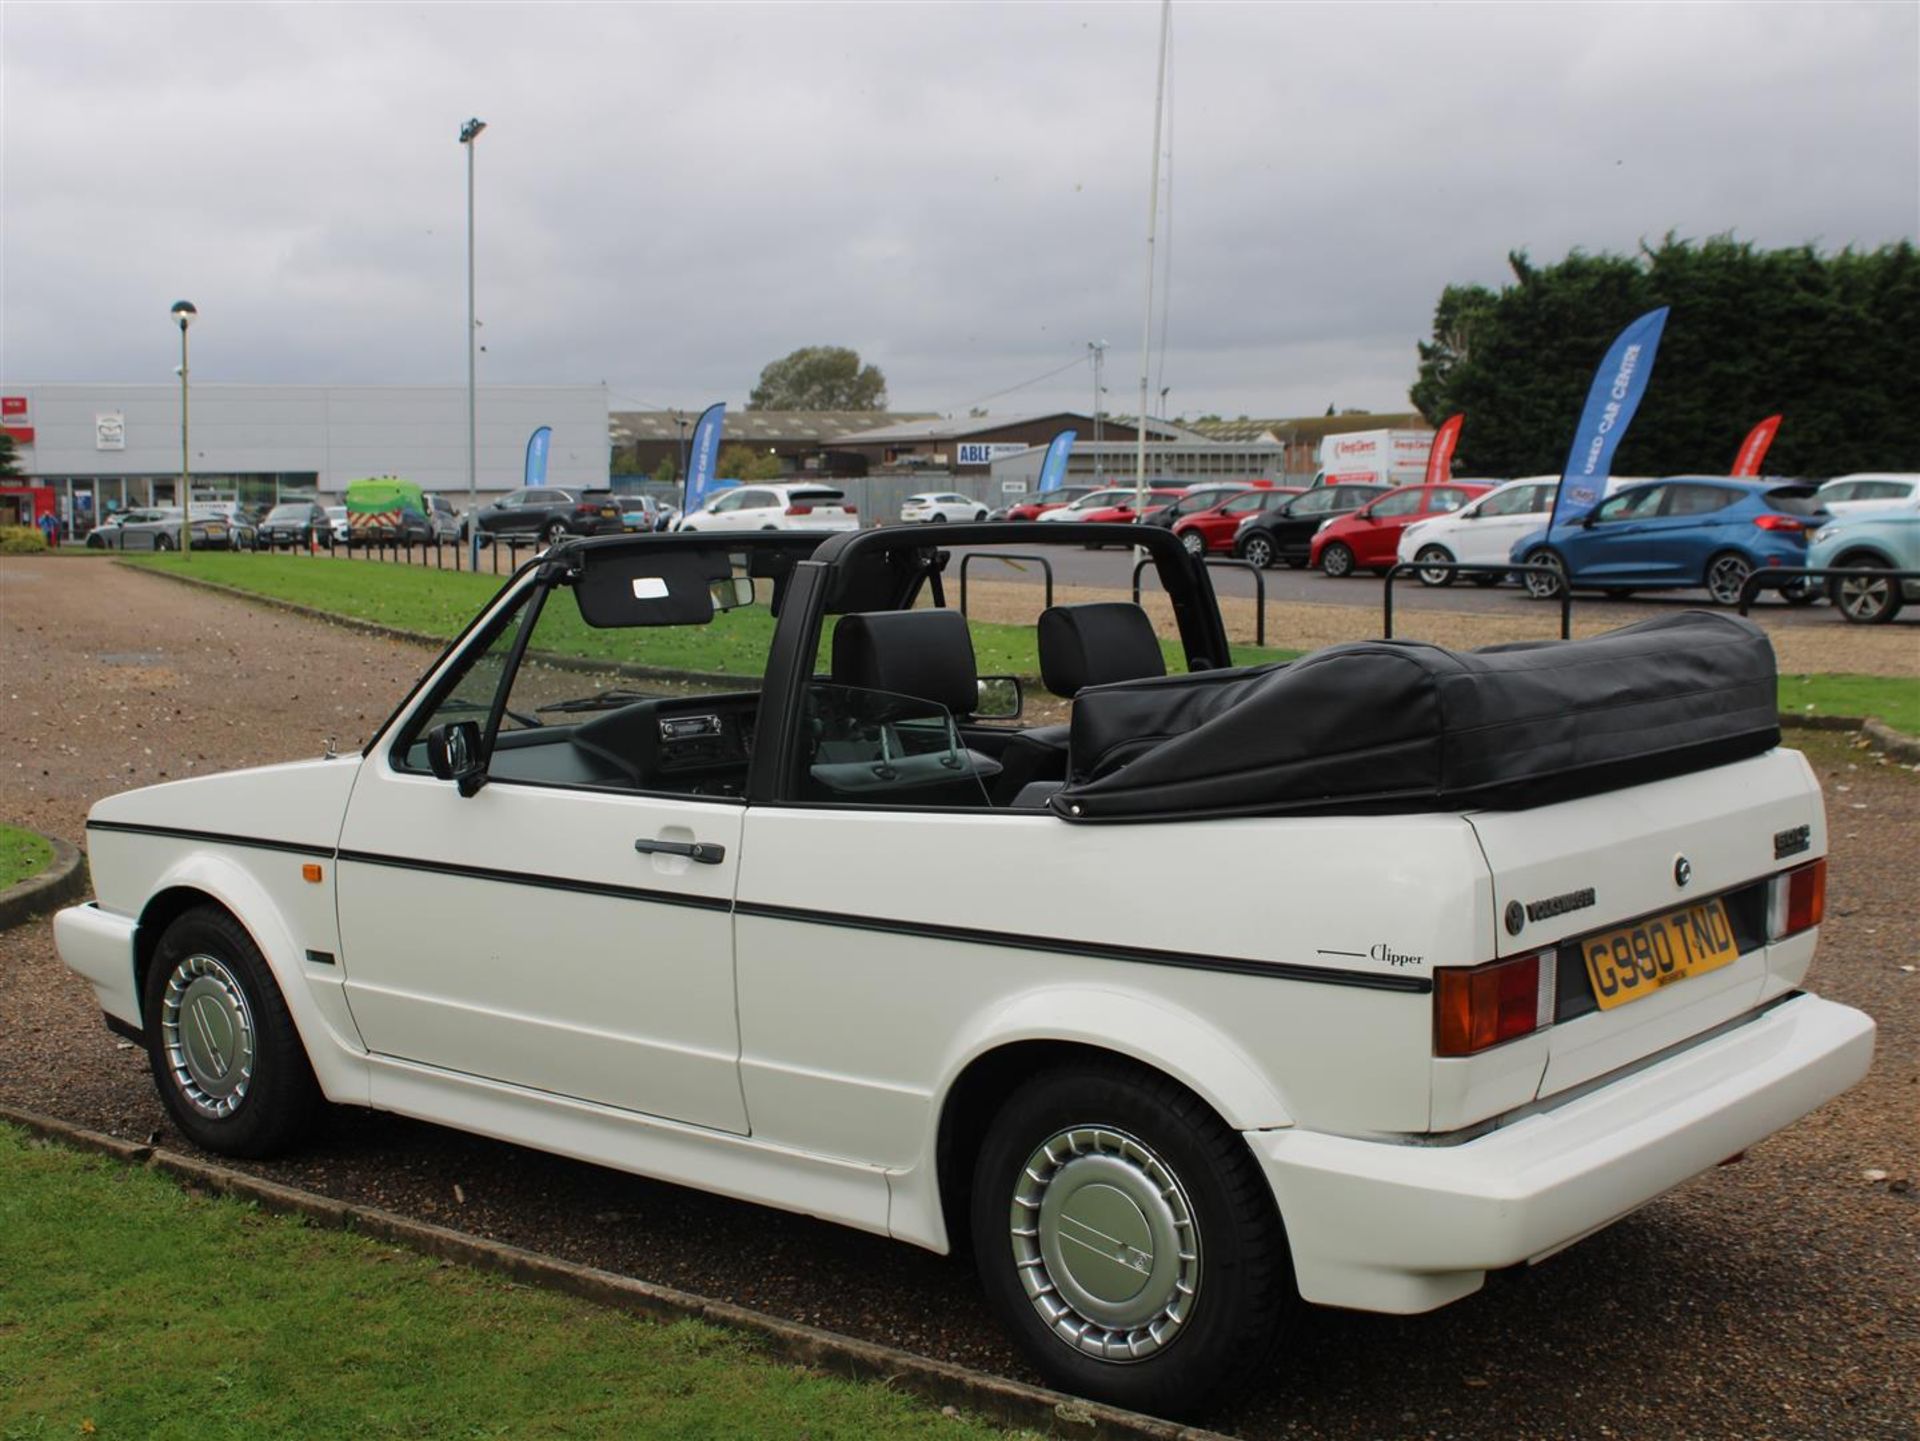 1989 VW Golf 1.8 Clipper Cabriolet Auto - Image 4 of 27